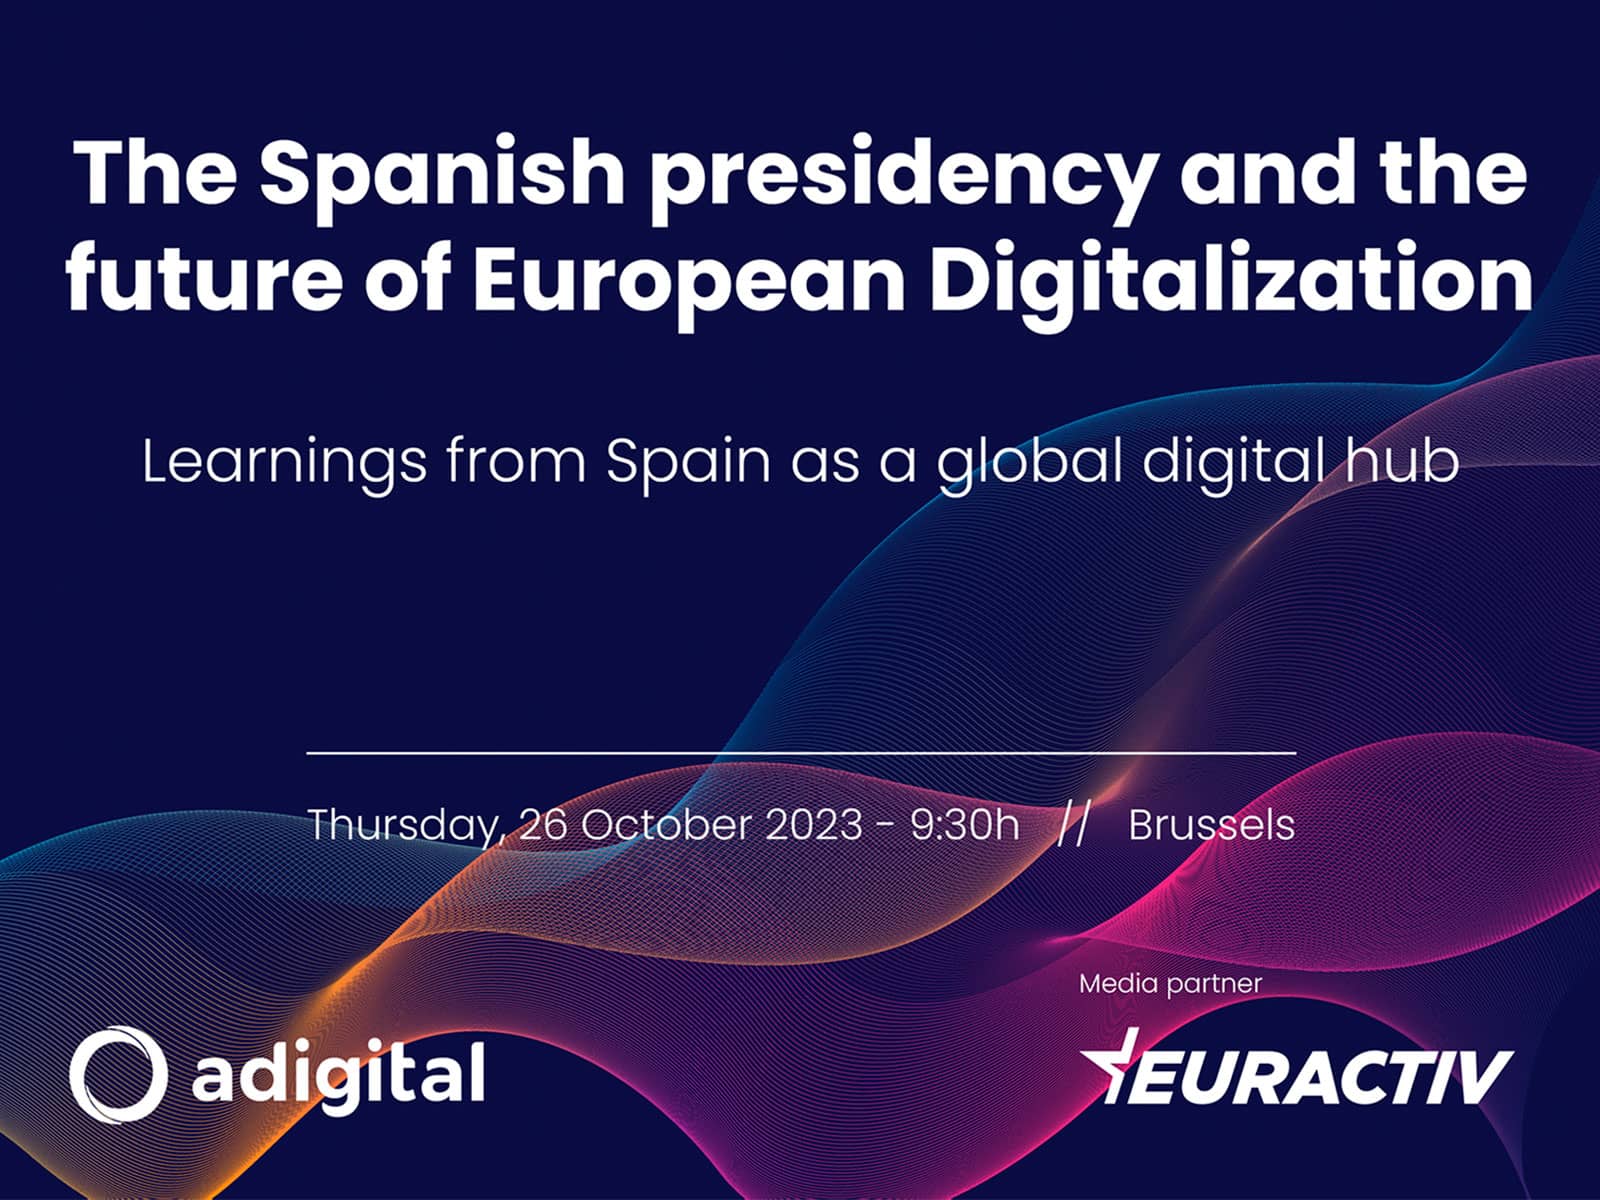 The Spanish presidency and the future of European Digitalization: learnings from Spain as a global digital Hub